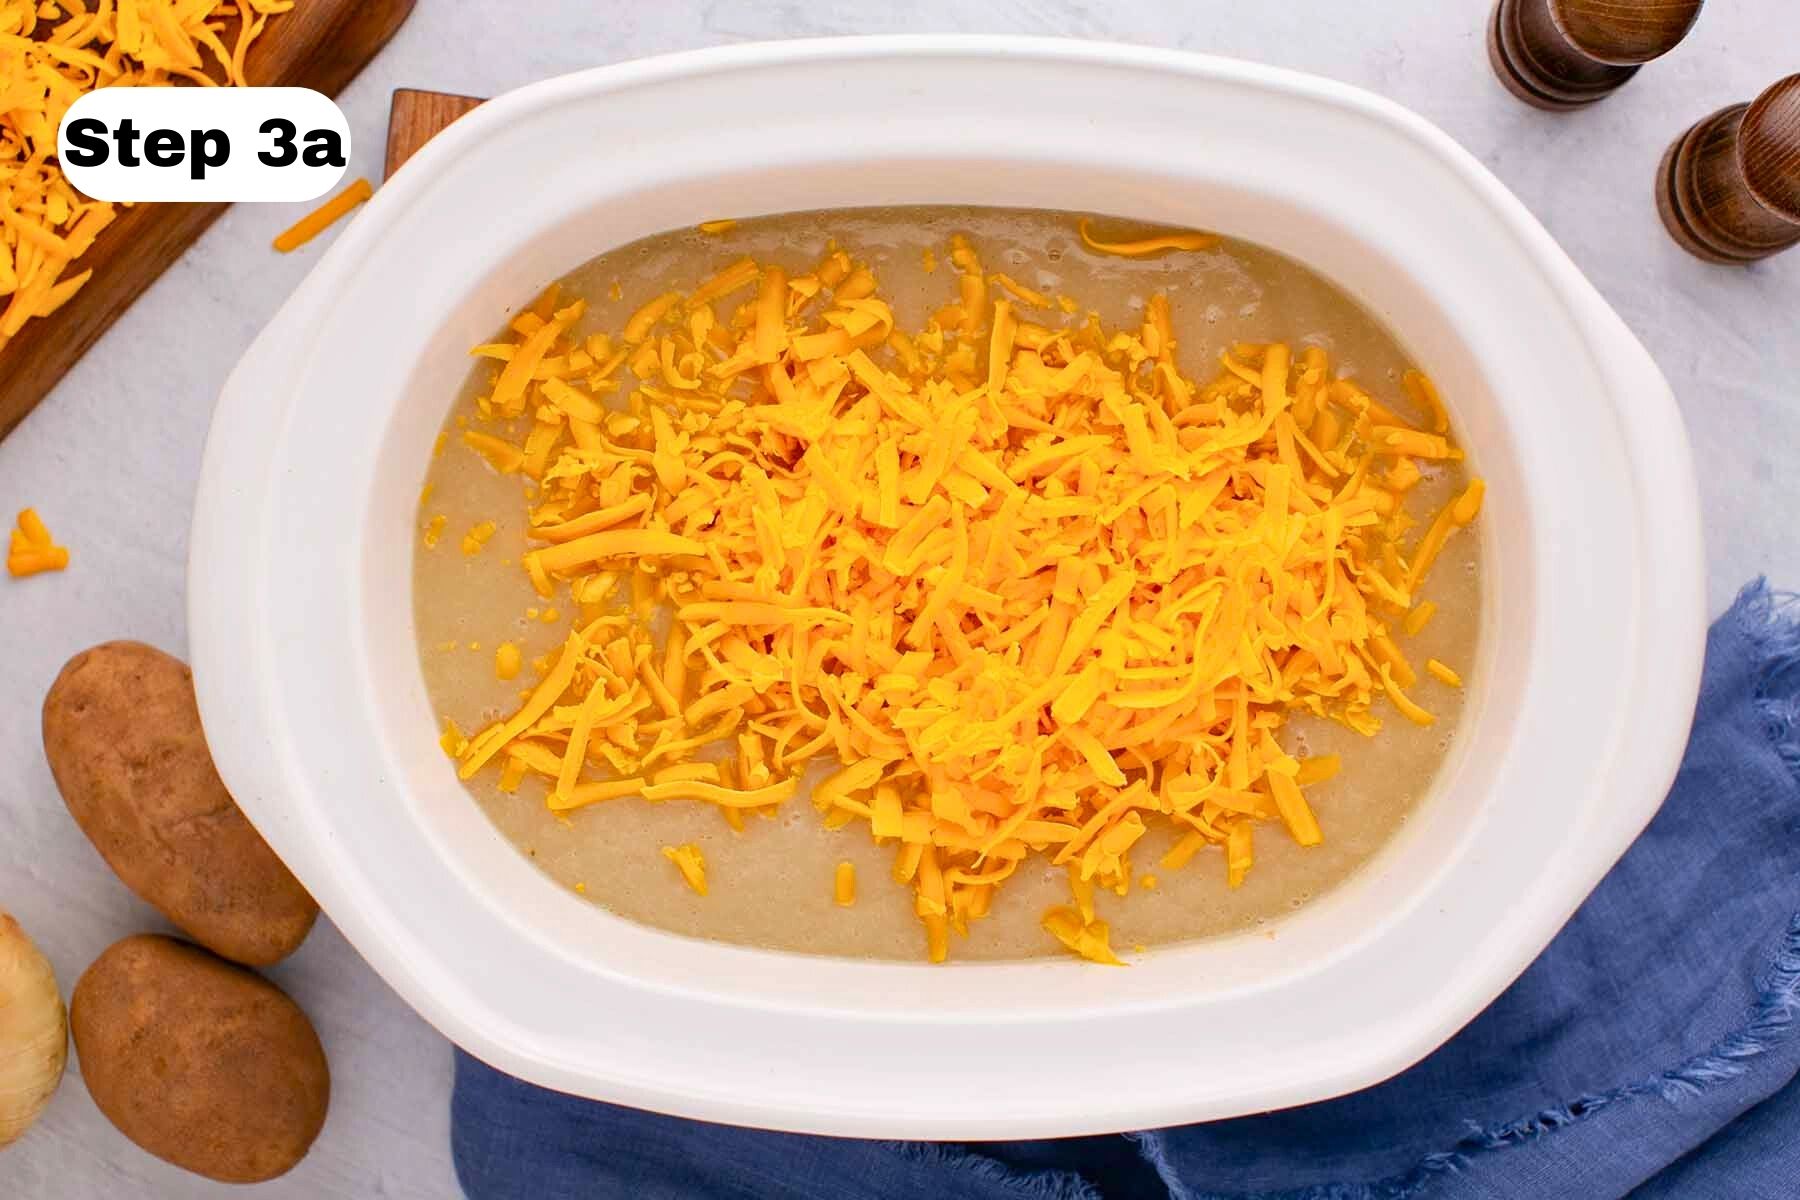 Grated cheddar cheese sprinkled over cooked soup in a large white slow cooker.